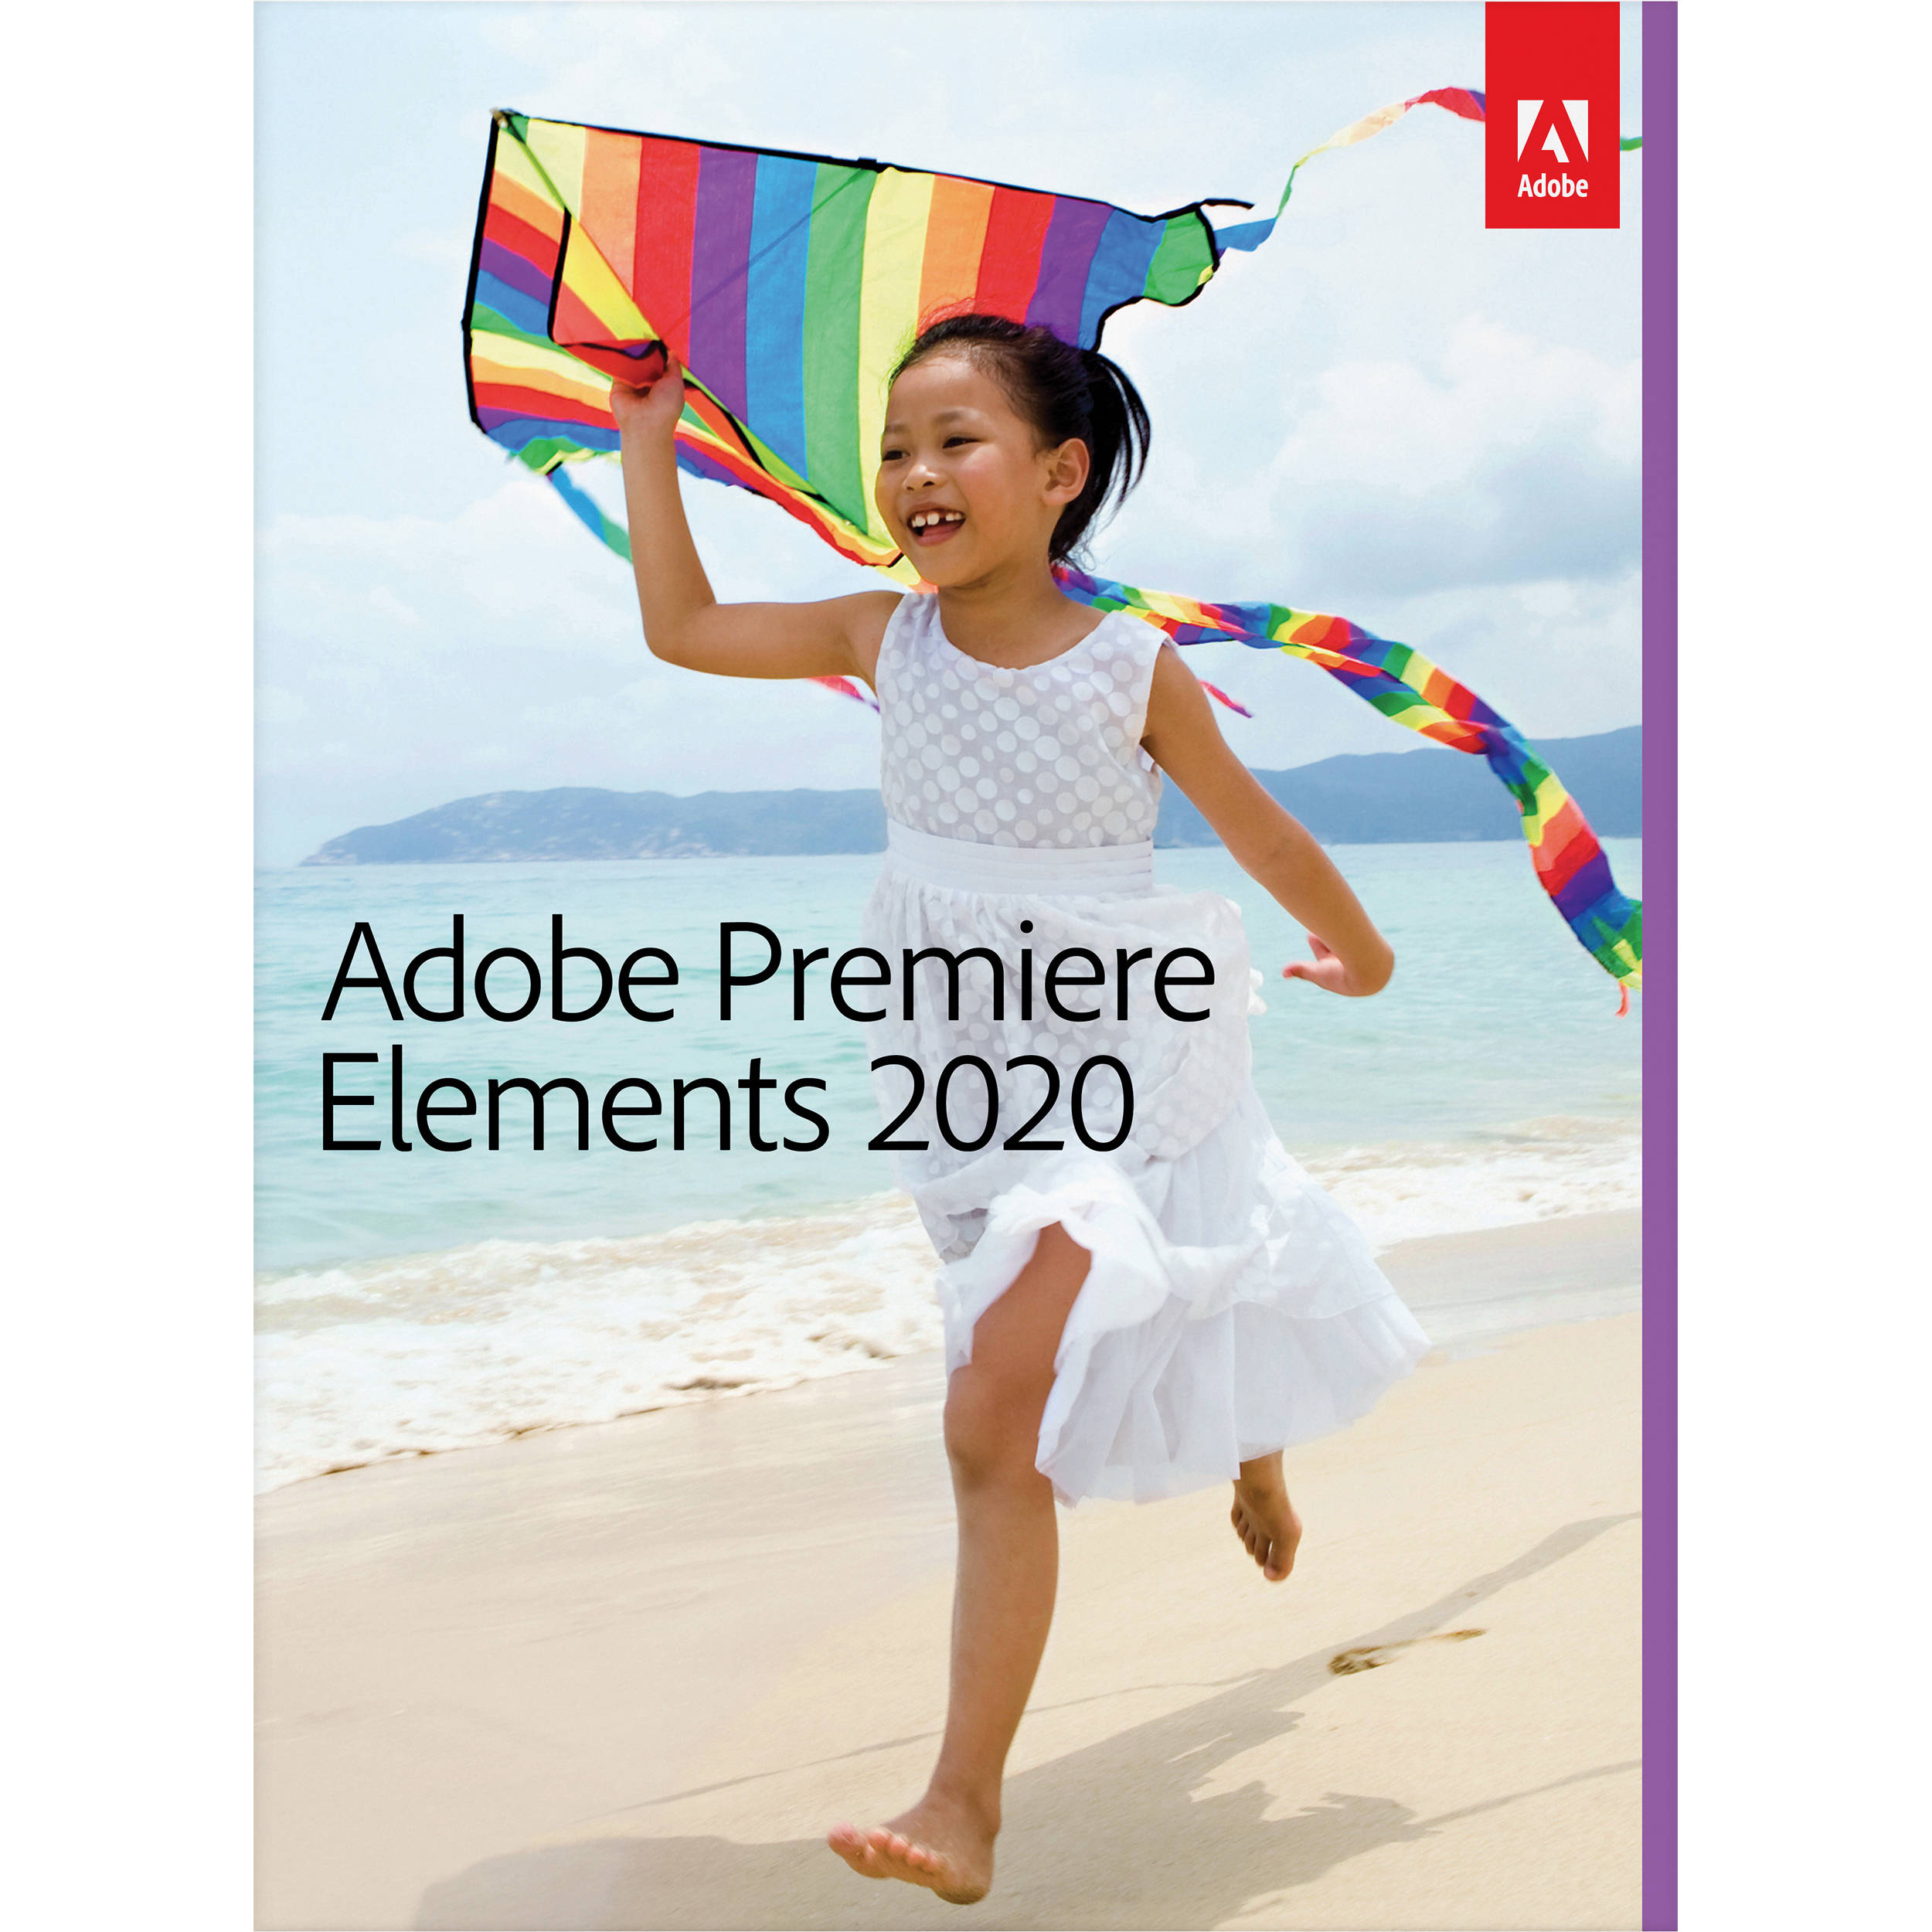 photoshop elements 15 download for mac